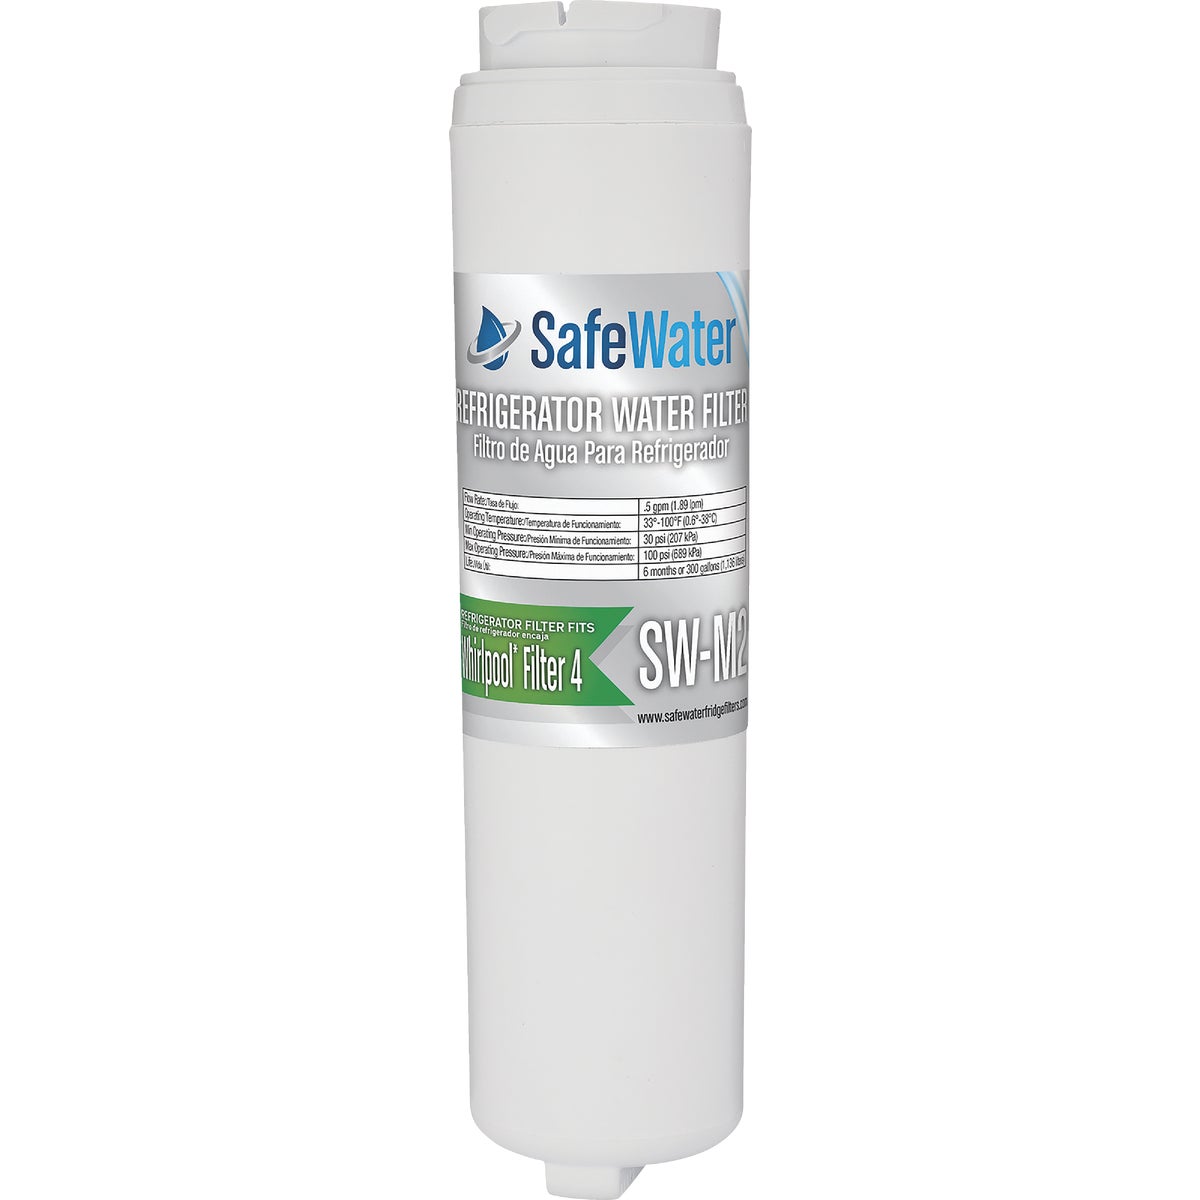 Item 401741, This EarthSmart replacement refrigerator water filter fits in place of 